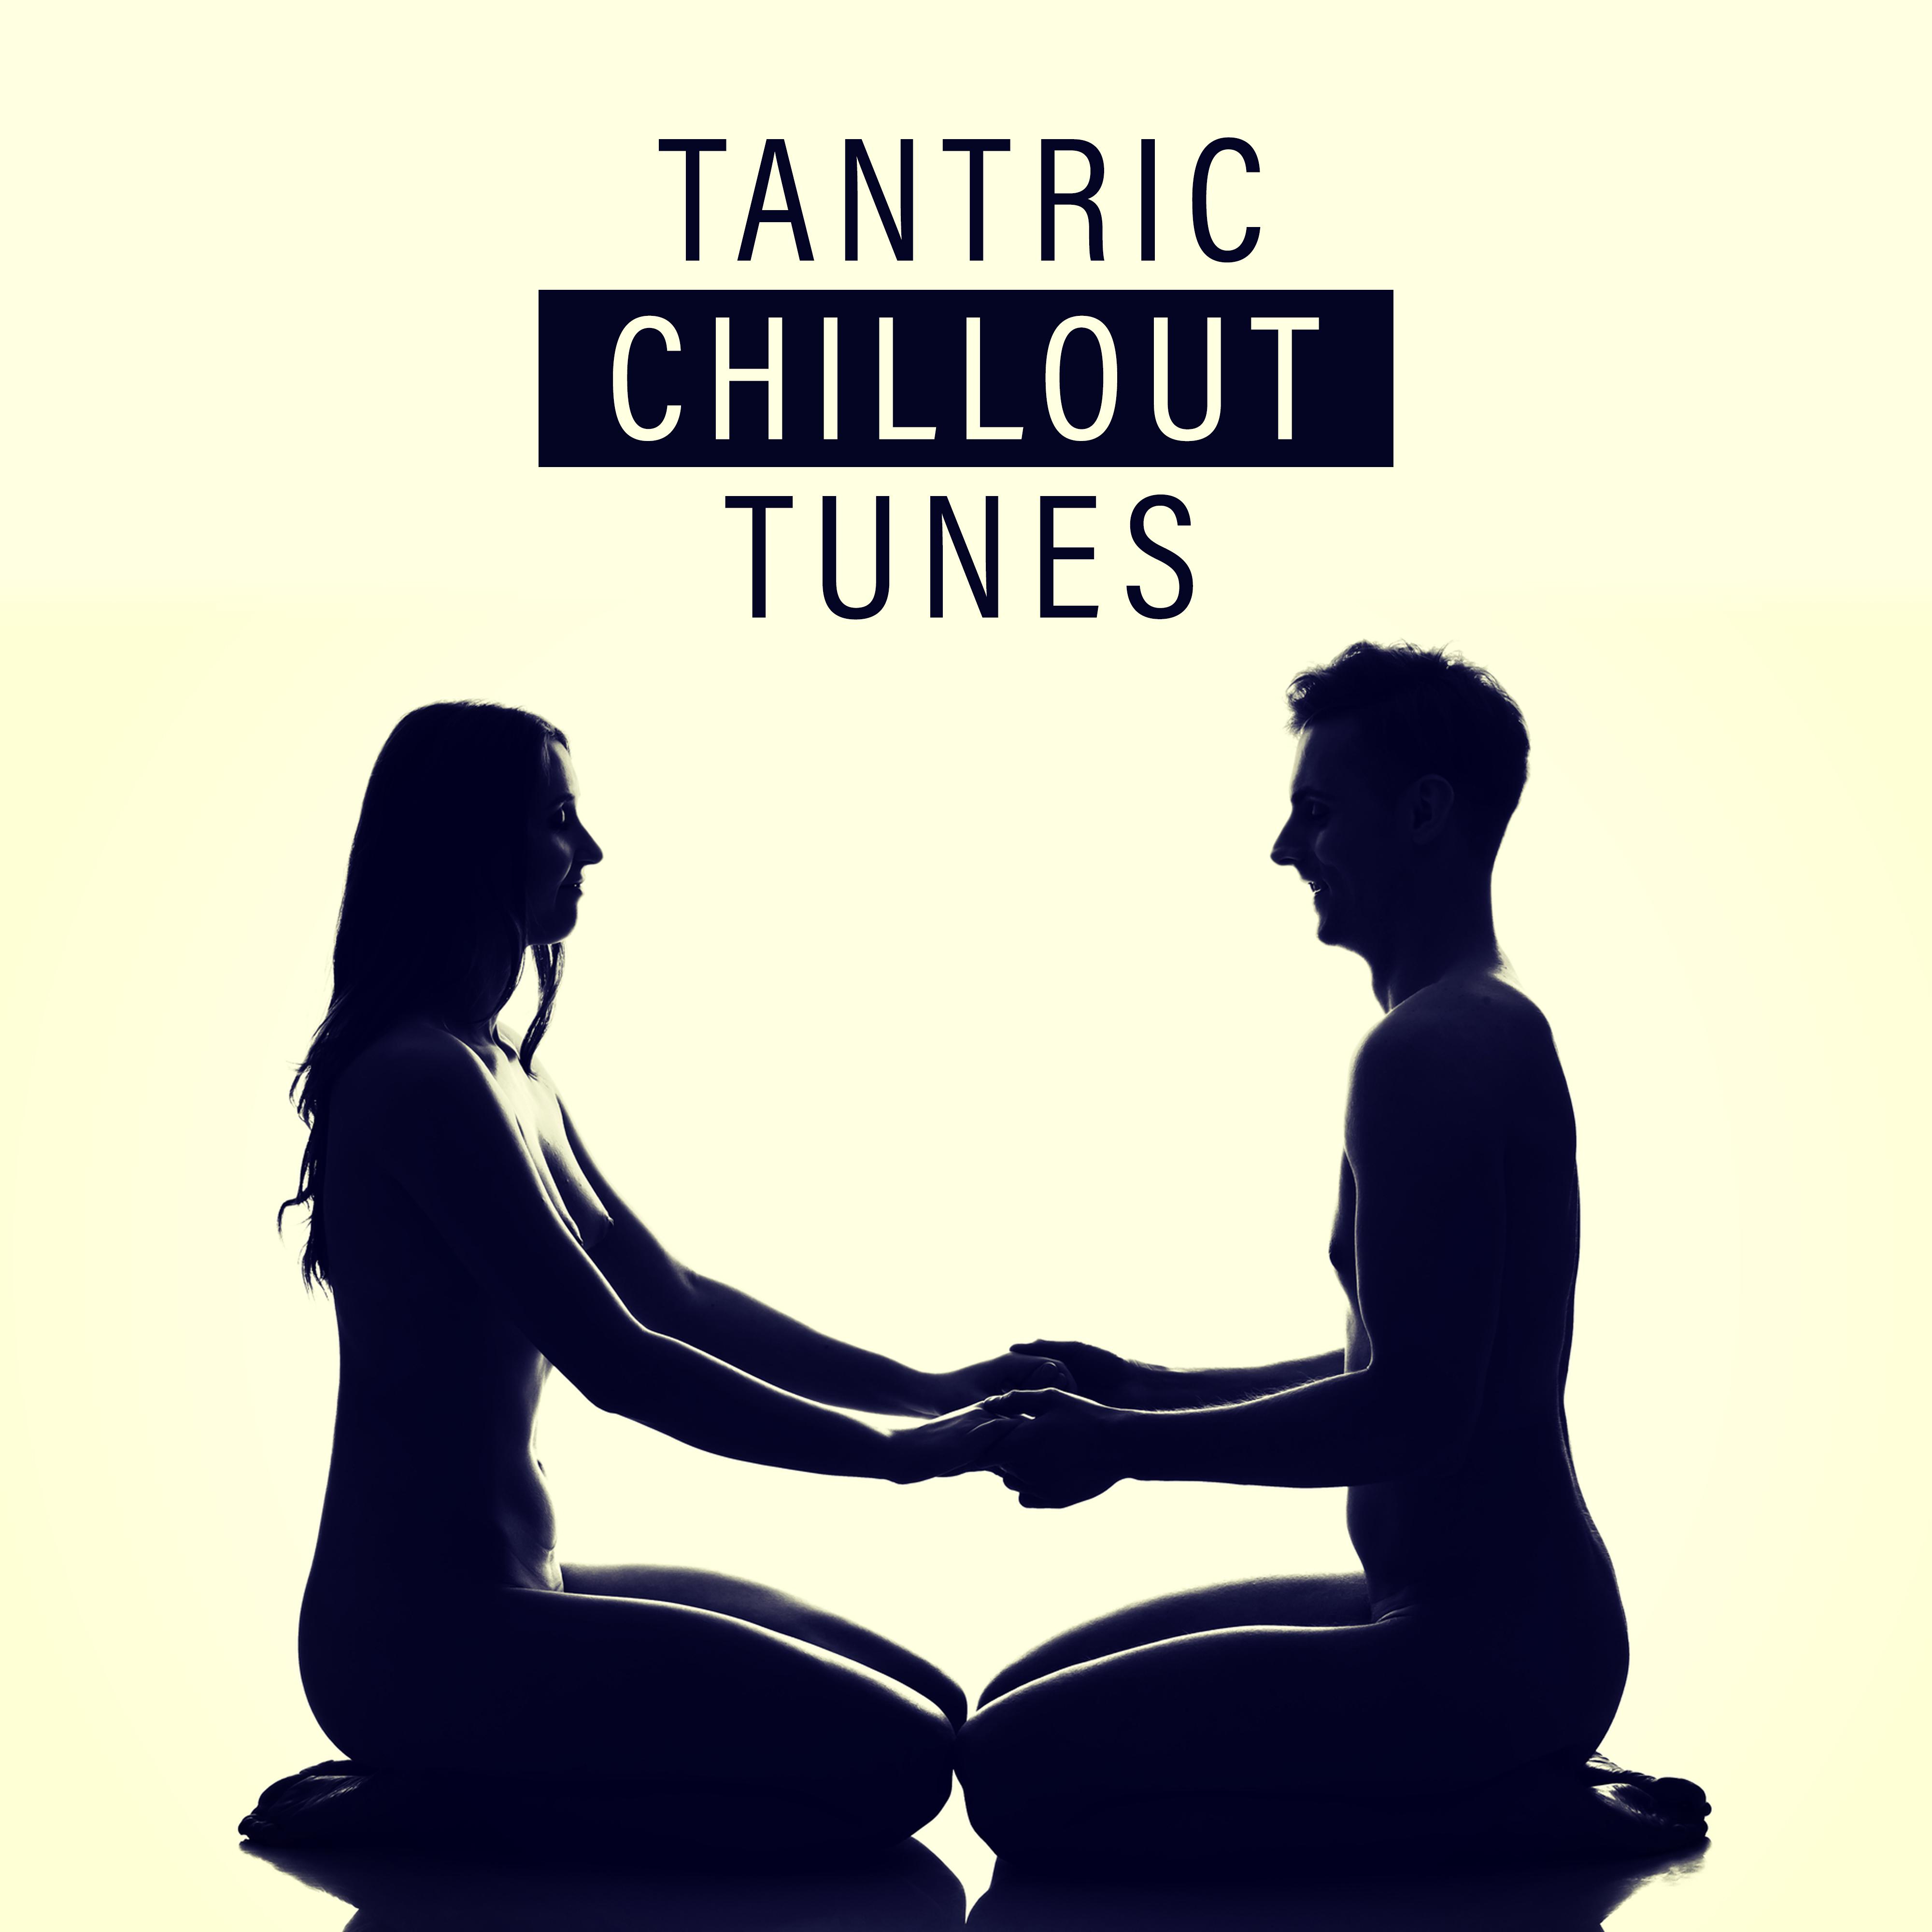 Tantric Chillout Tunes  Sensual Music for , Chillout 2019, Yoga Chill, Erotic Massage, Zen, Tantric ,  Vibes